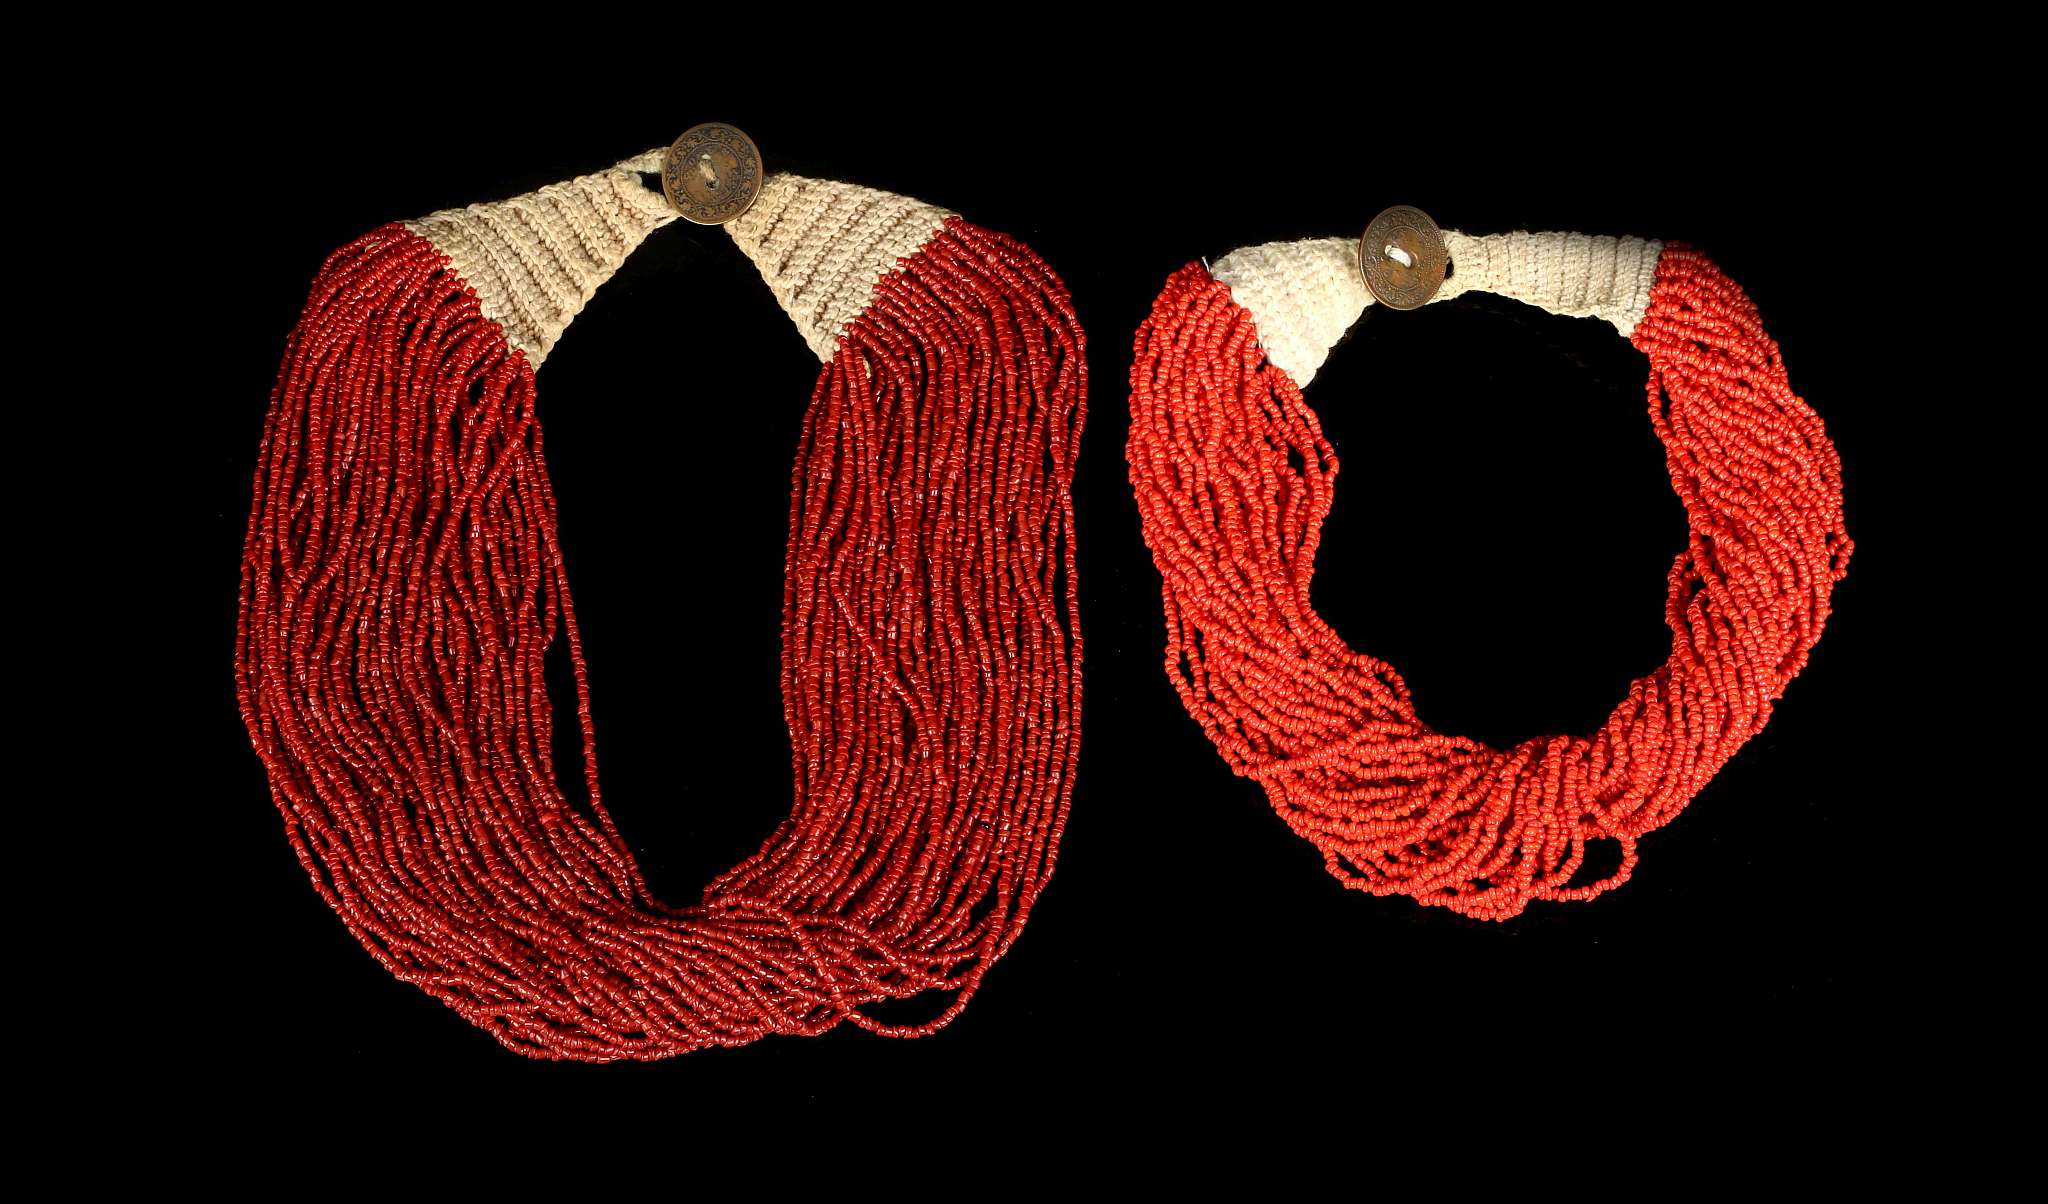 TWO GLASS BEAD NECKLACES, EASTERN INDIA OR BANGLADESH Composed of multiple strings of beads, one